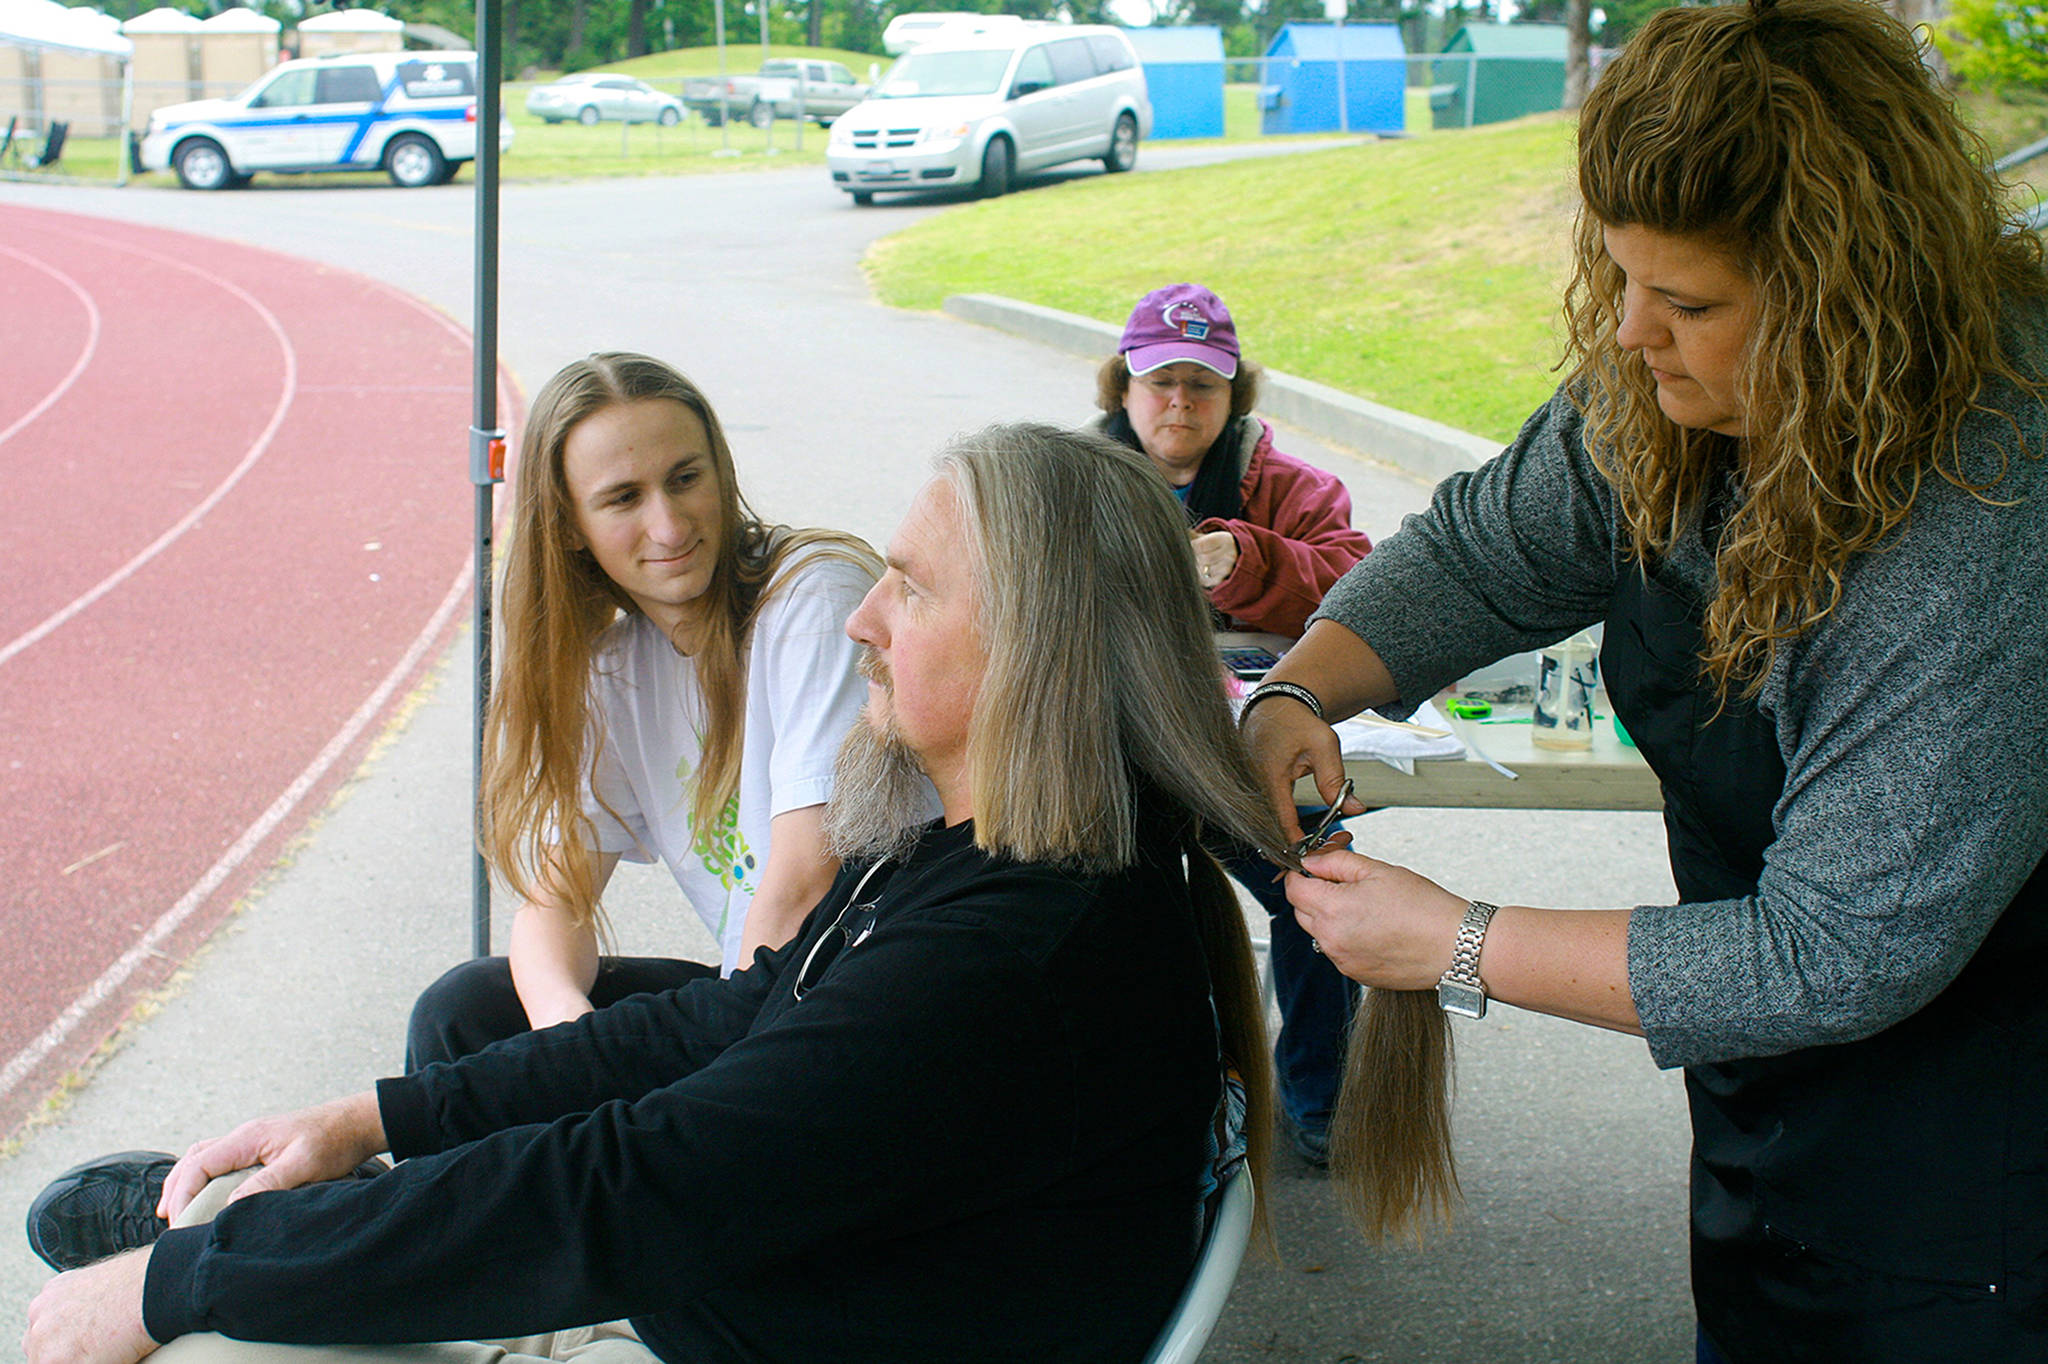 Les Richardson, center, gets two and a half years of hair growth clipped off by Oak Harbor resident Mollie Brodt at the Oak Harbor Relay for Life Saturday. Nathaniel Richardson looks on, awaiting his turn at the sheers. The Richardsons are donating their hair to Wigs For Kids to benefit cancer patients. Photo by Daniel Warn/Whidbey News-Times